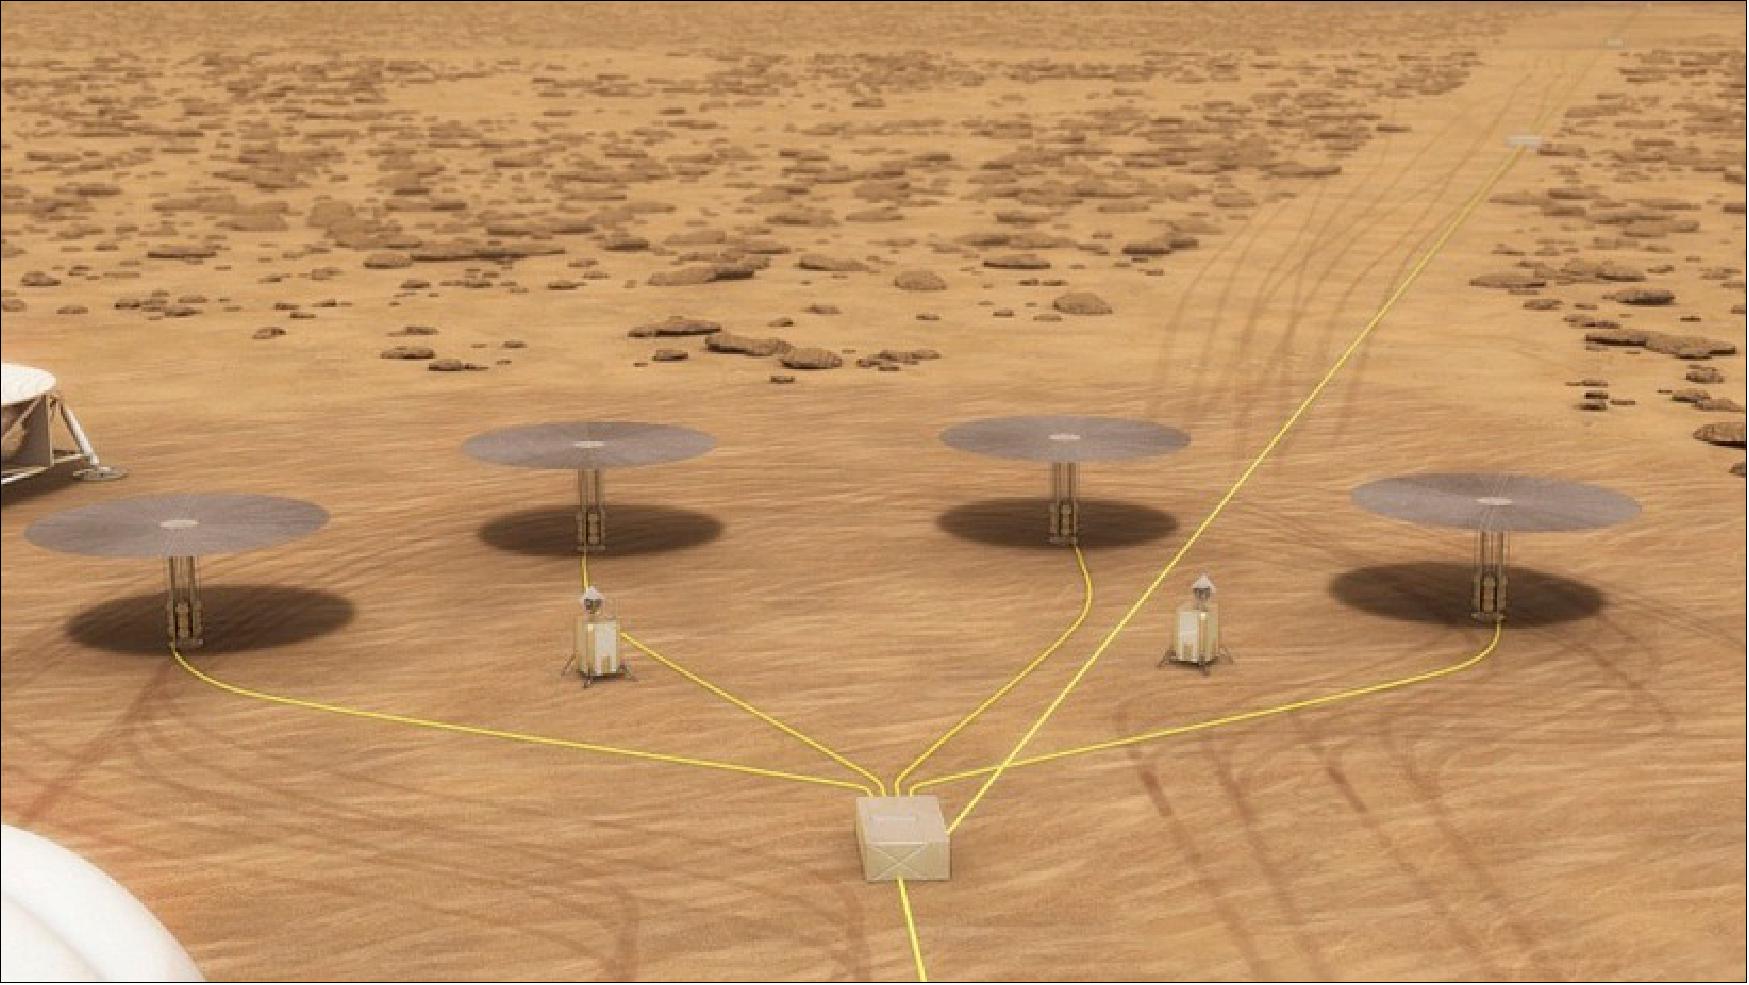 Figure 3: Fission surface power systems can be scaled up to help meet future mission energy needs (image credit: NASA)